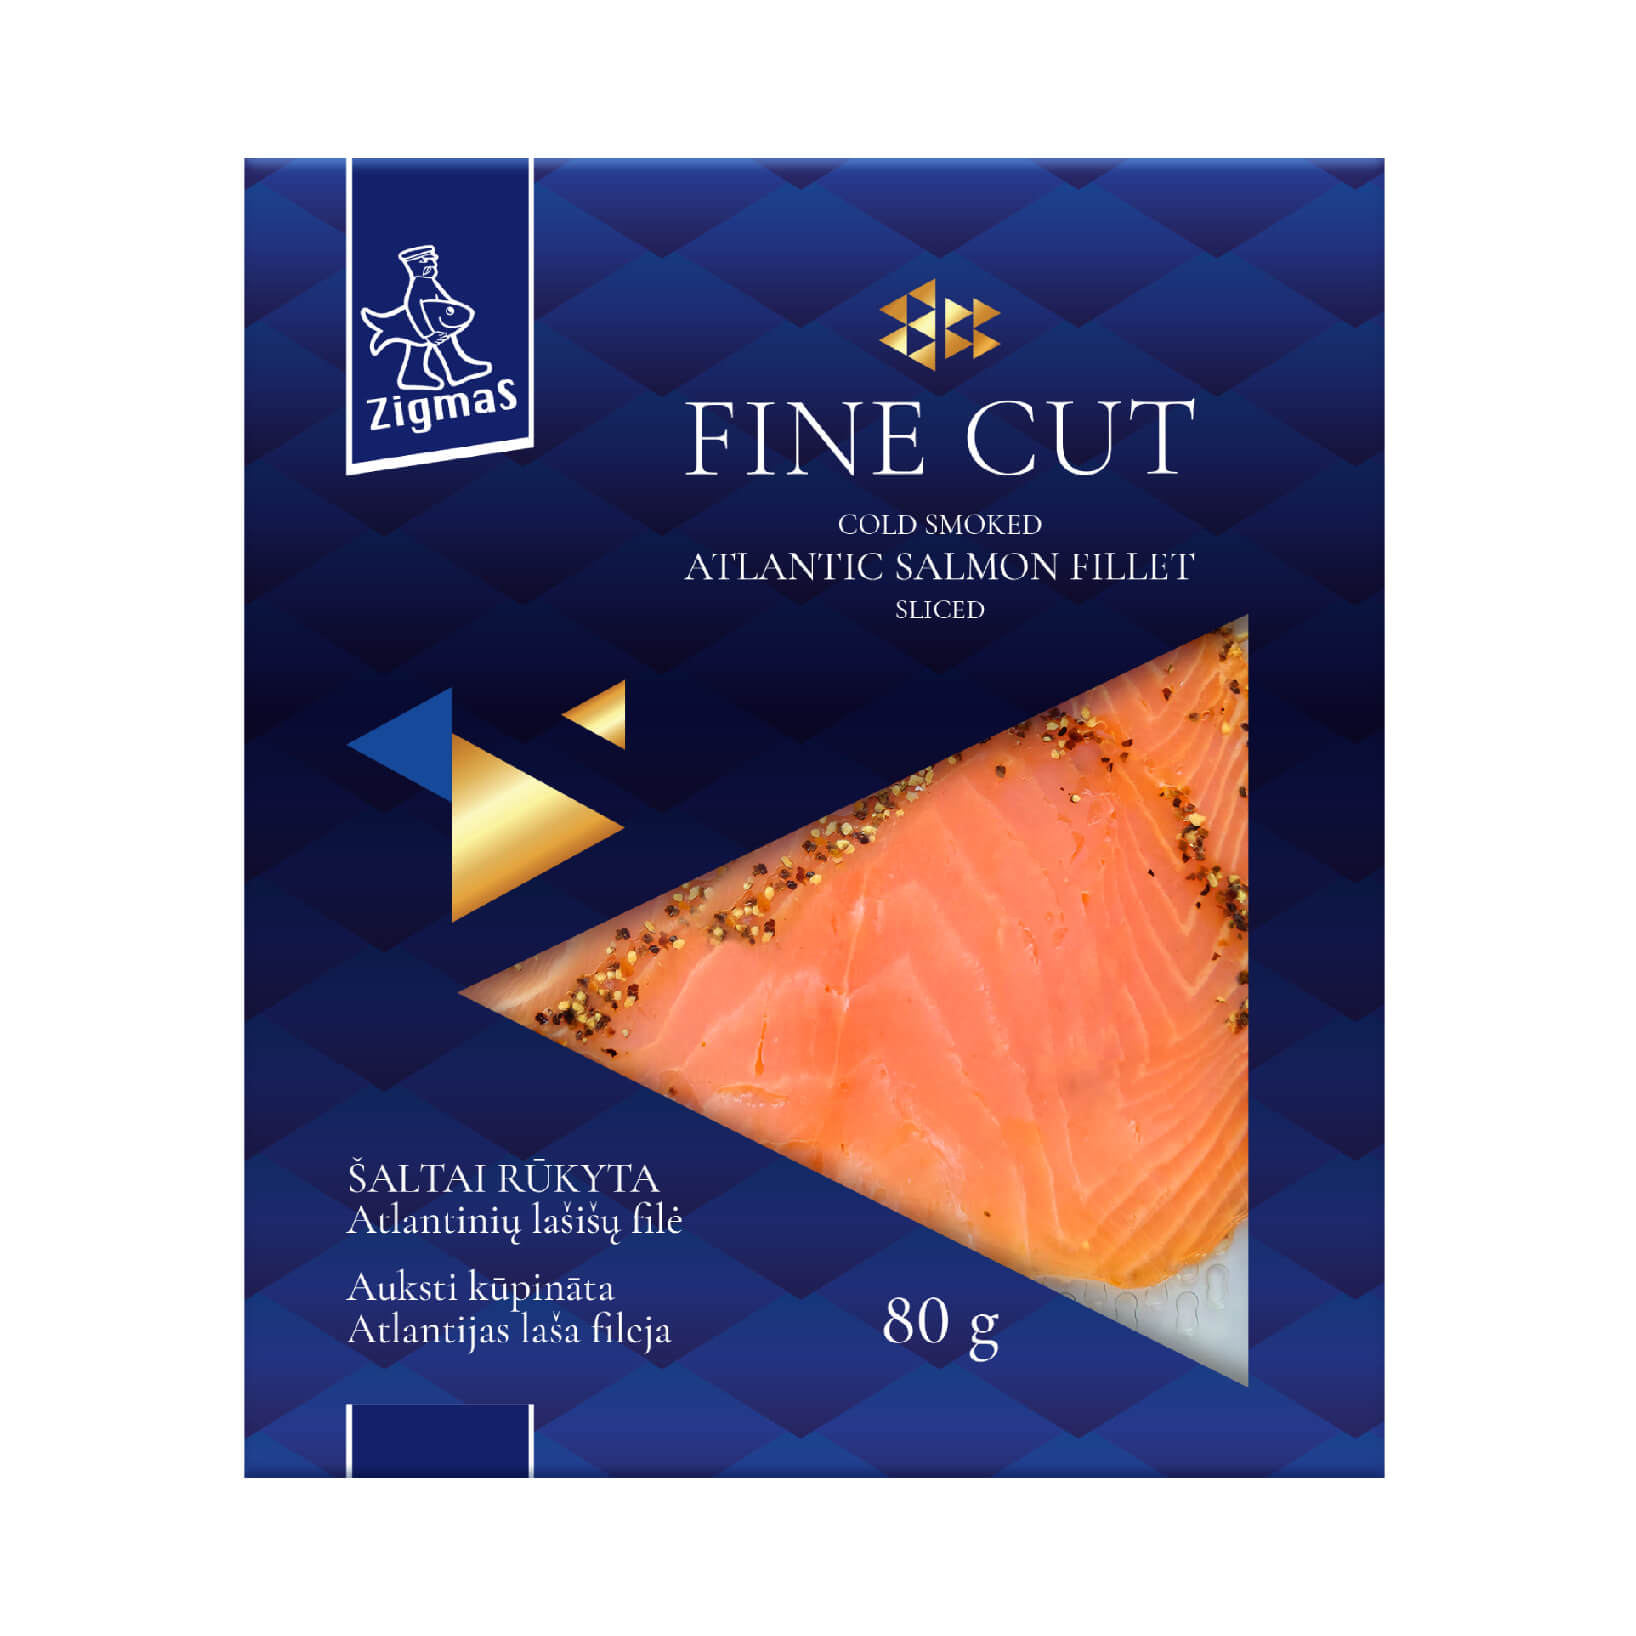 FINE CUT cold smoked Atlantic salmon fillet with pepper